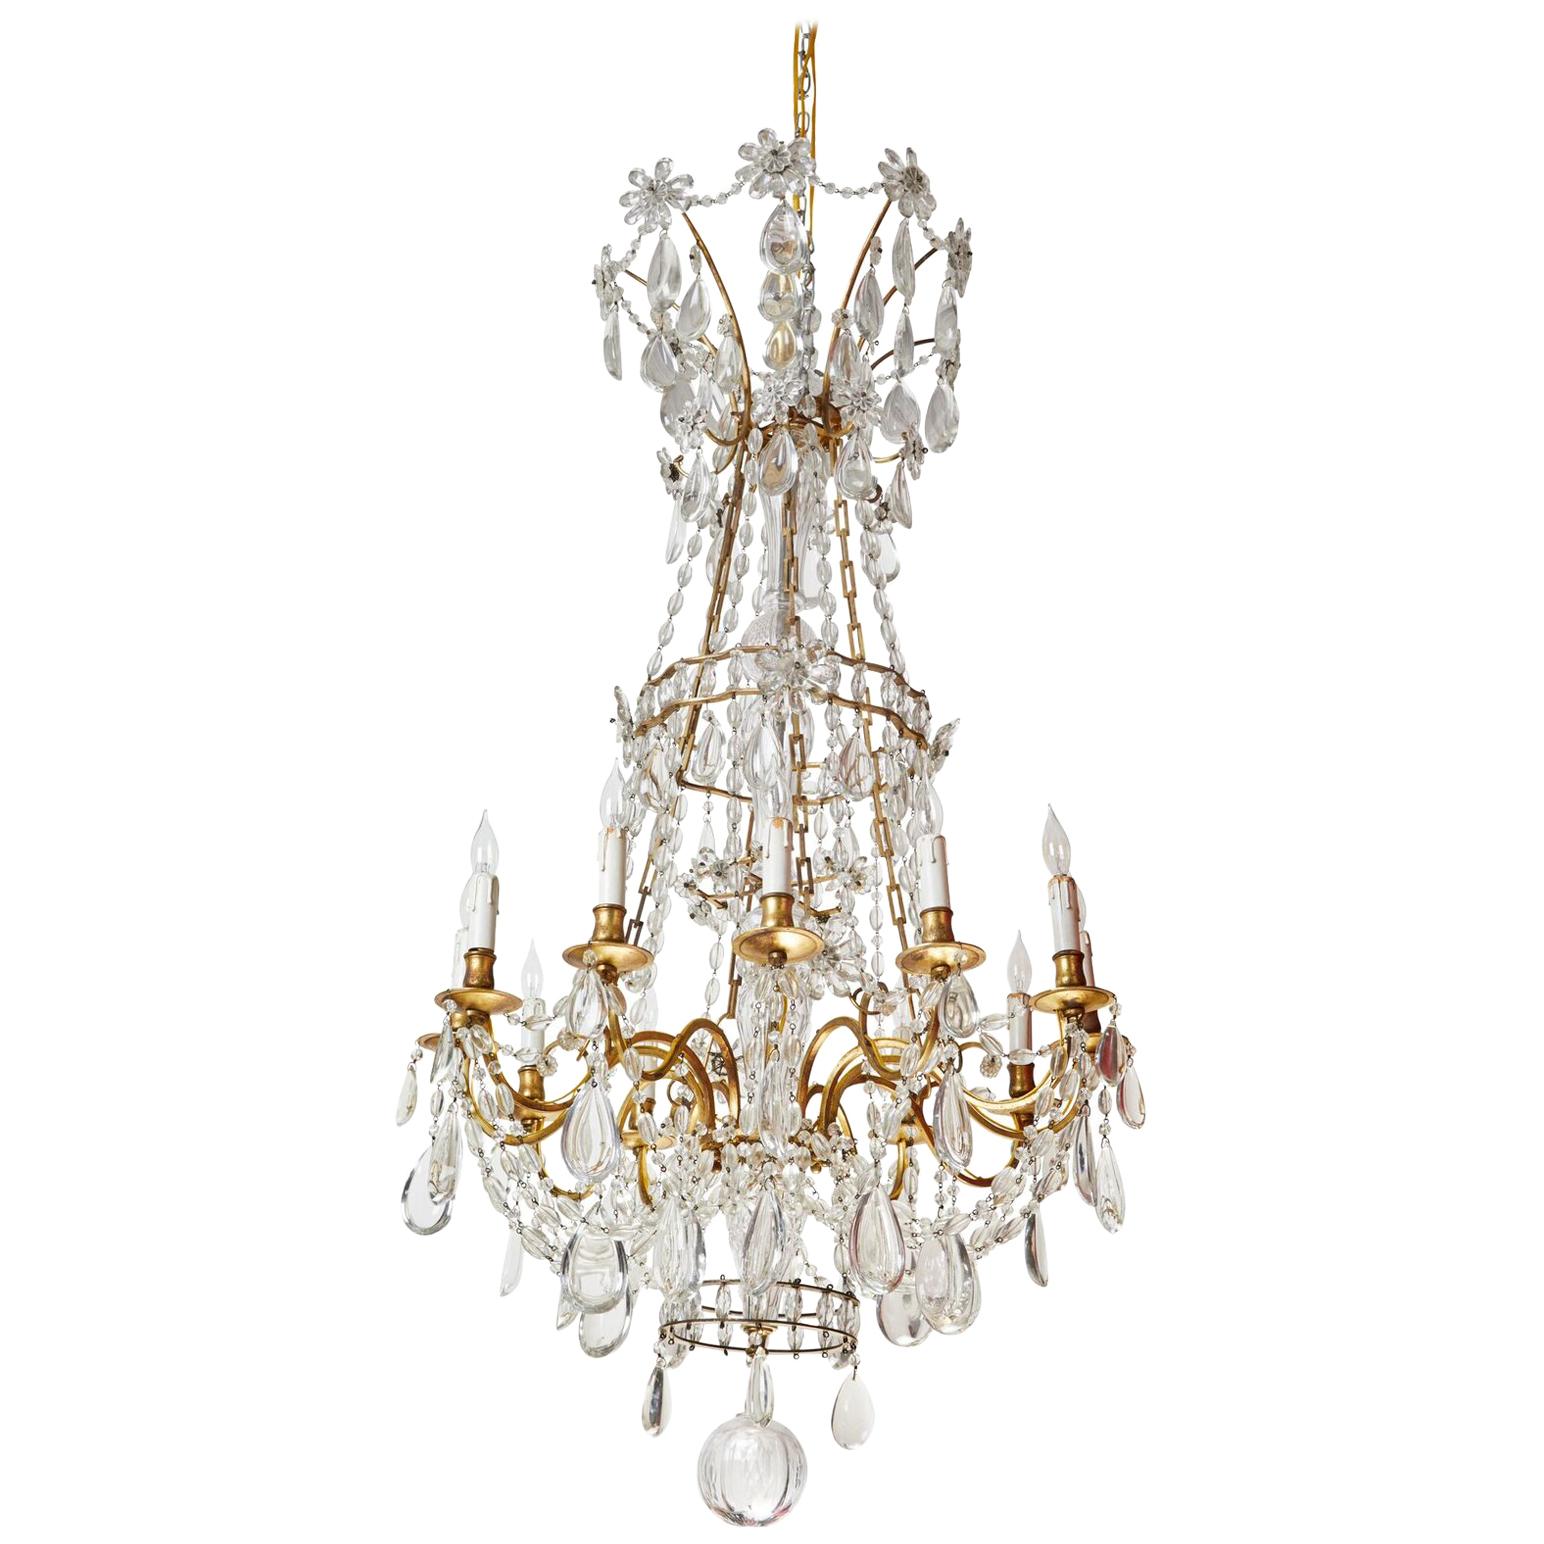 Pair of Turn-of-the-Century, French Chandeliers